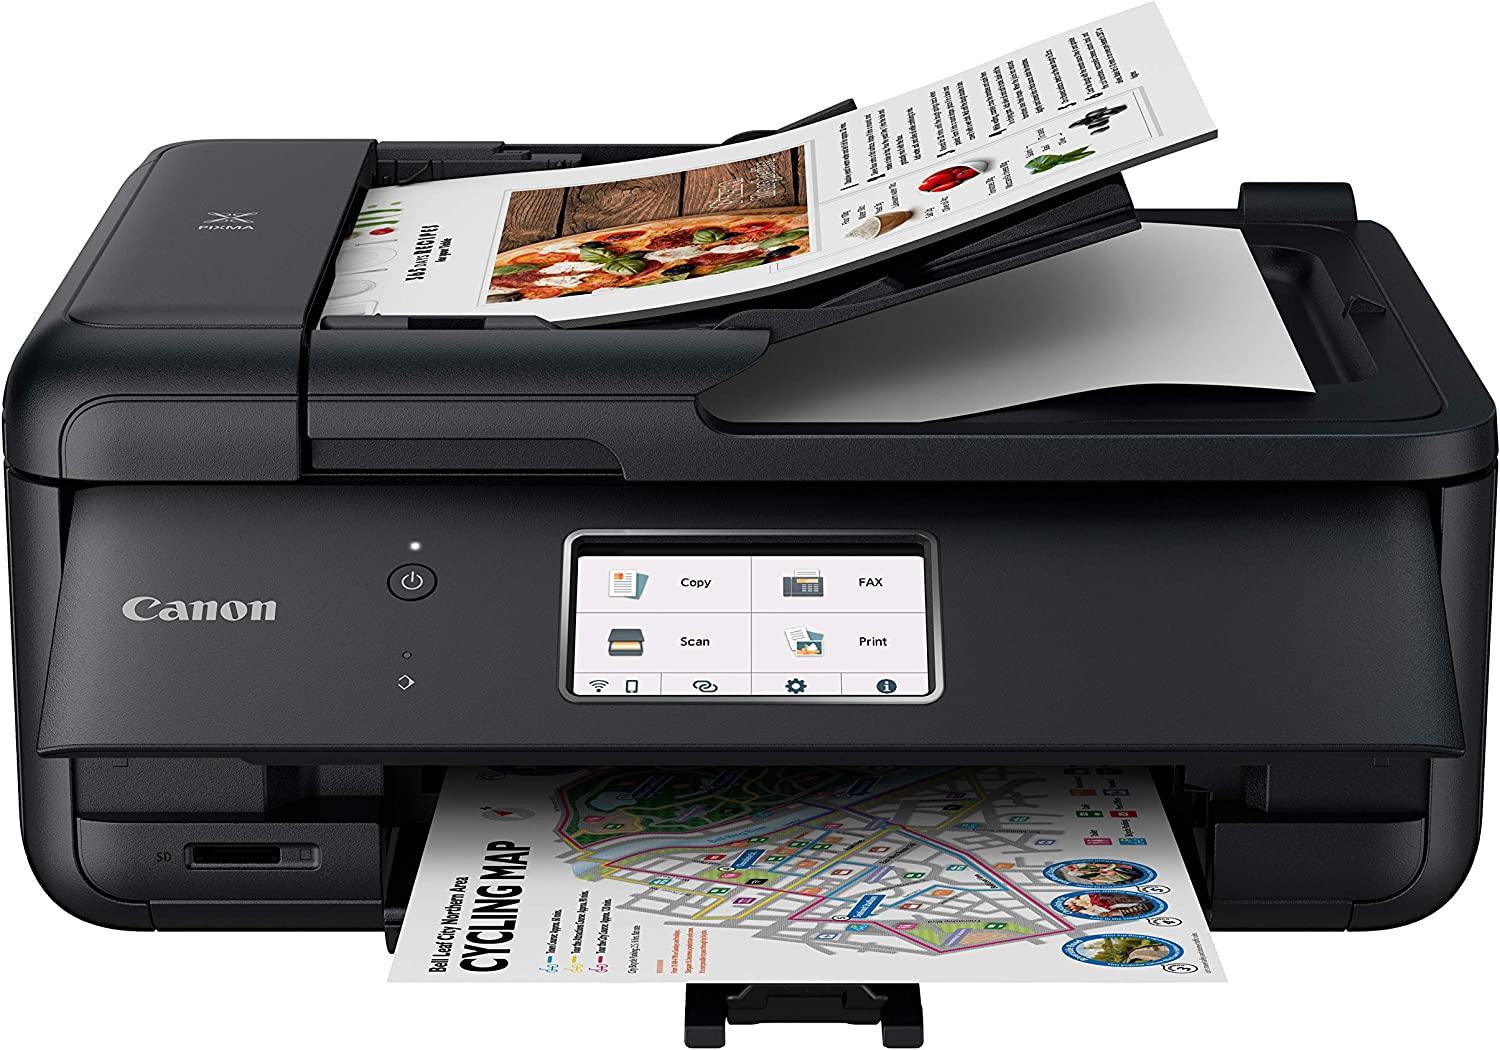 Canon TR8620a All-in-One Printer Copier and Scanner for $119.99 Shipped